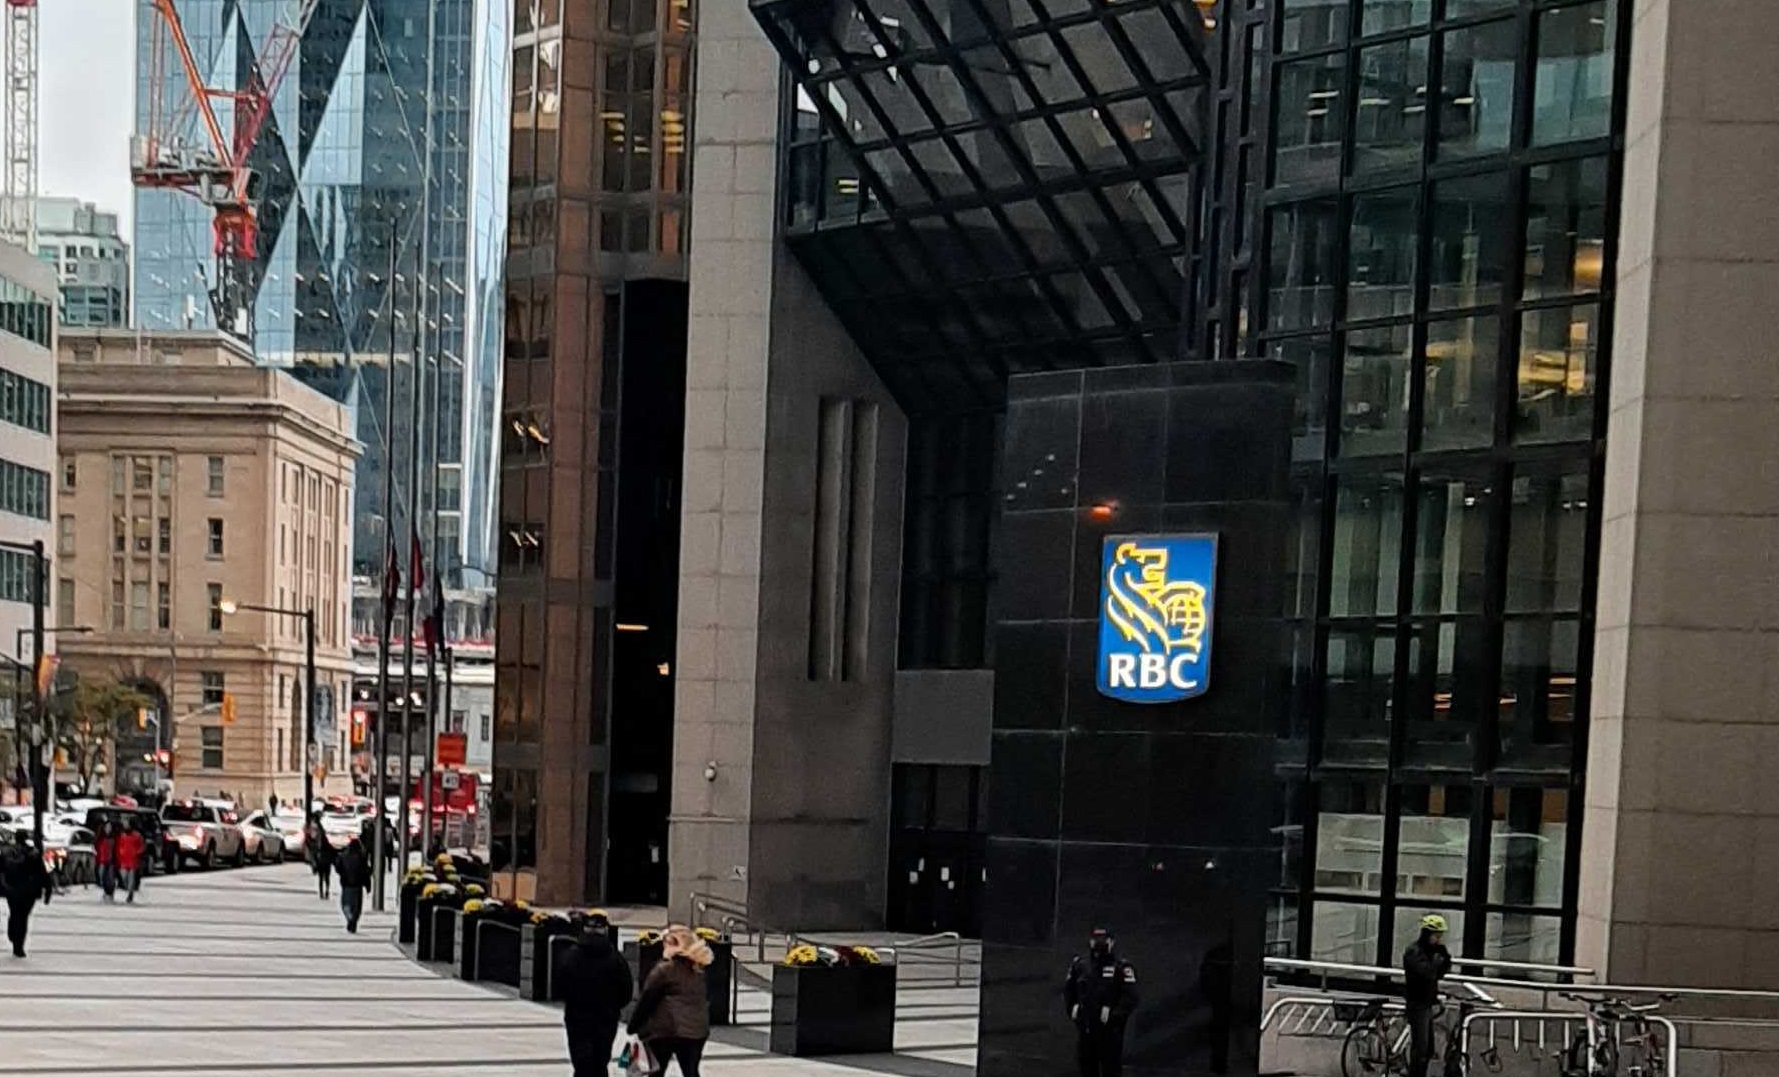 RBC’s latest ESG update fails to meaningfully address climate impacts